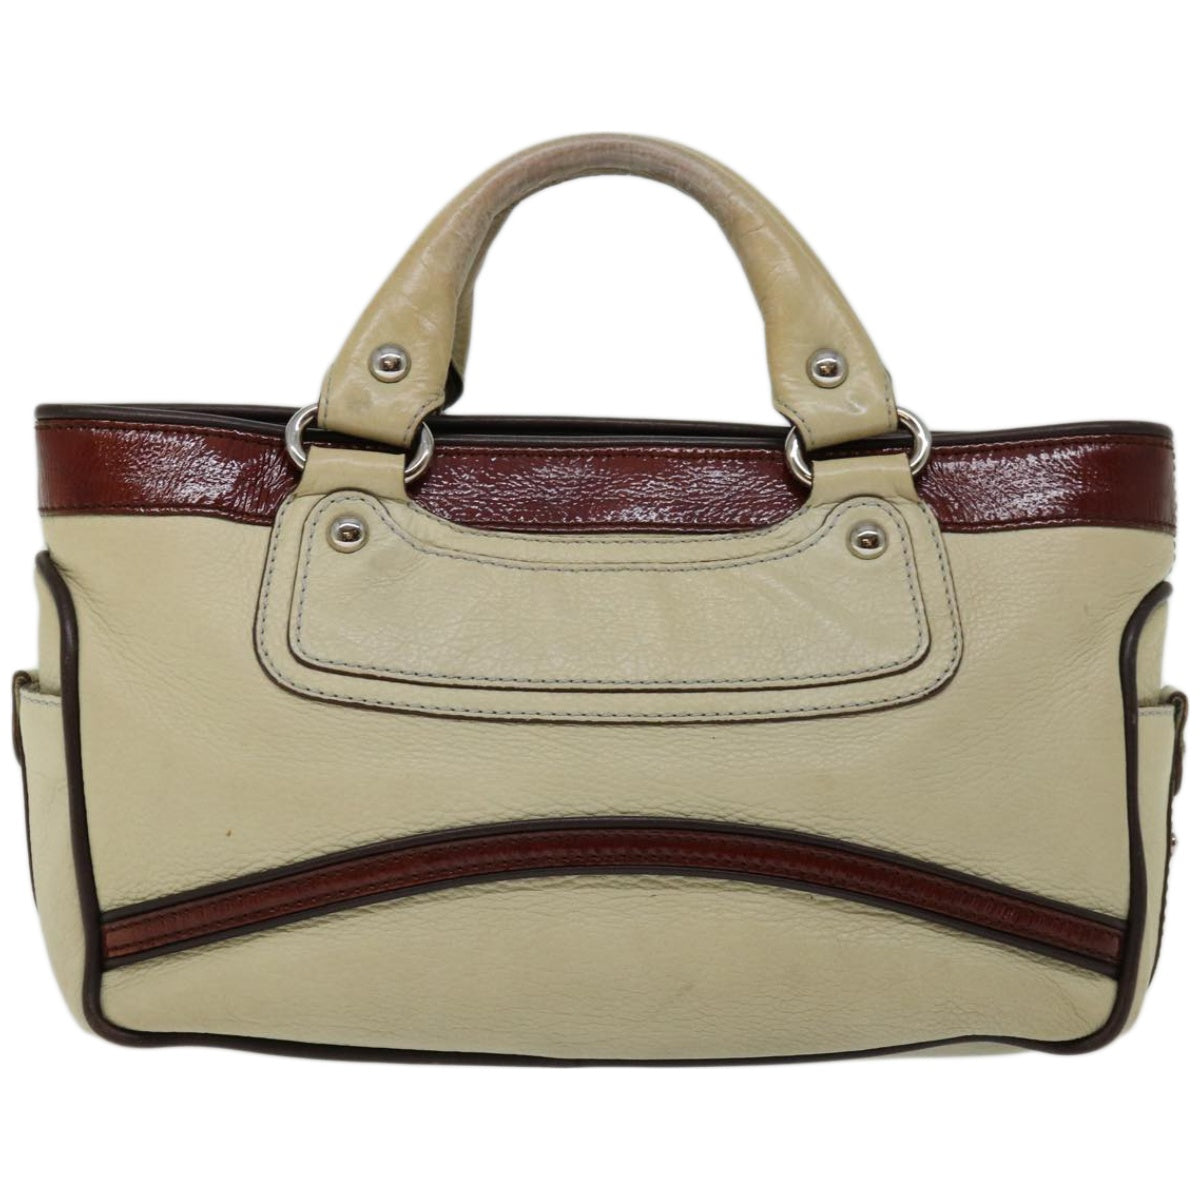 CELINE Hand Bag Leather Beige Auth bs12047